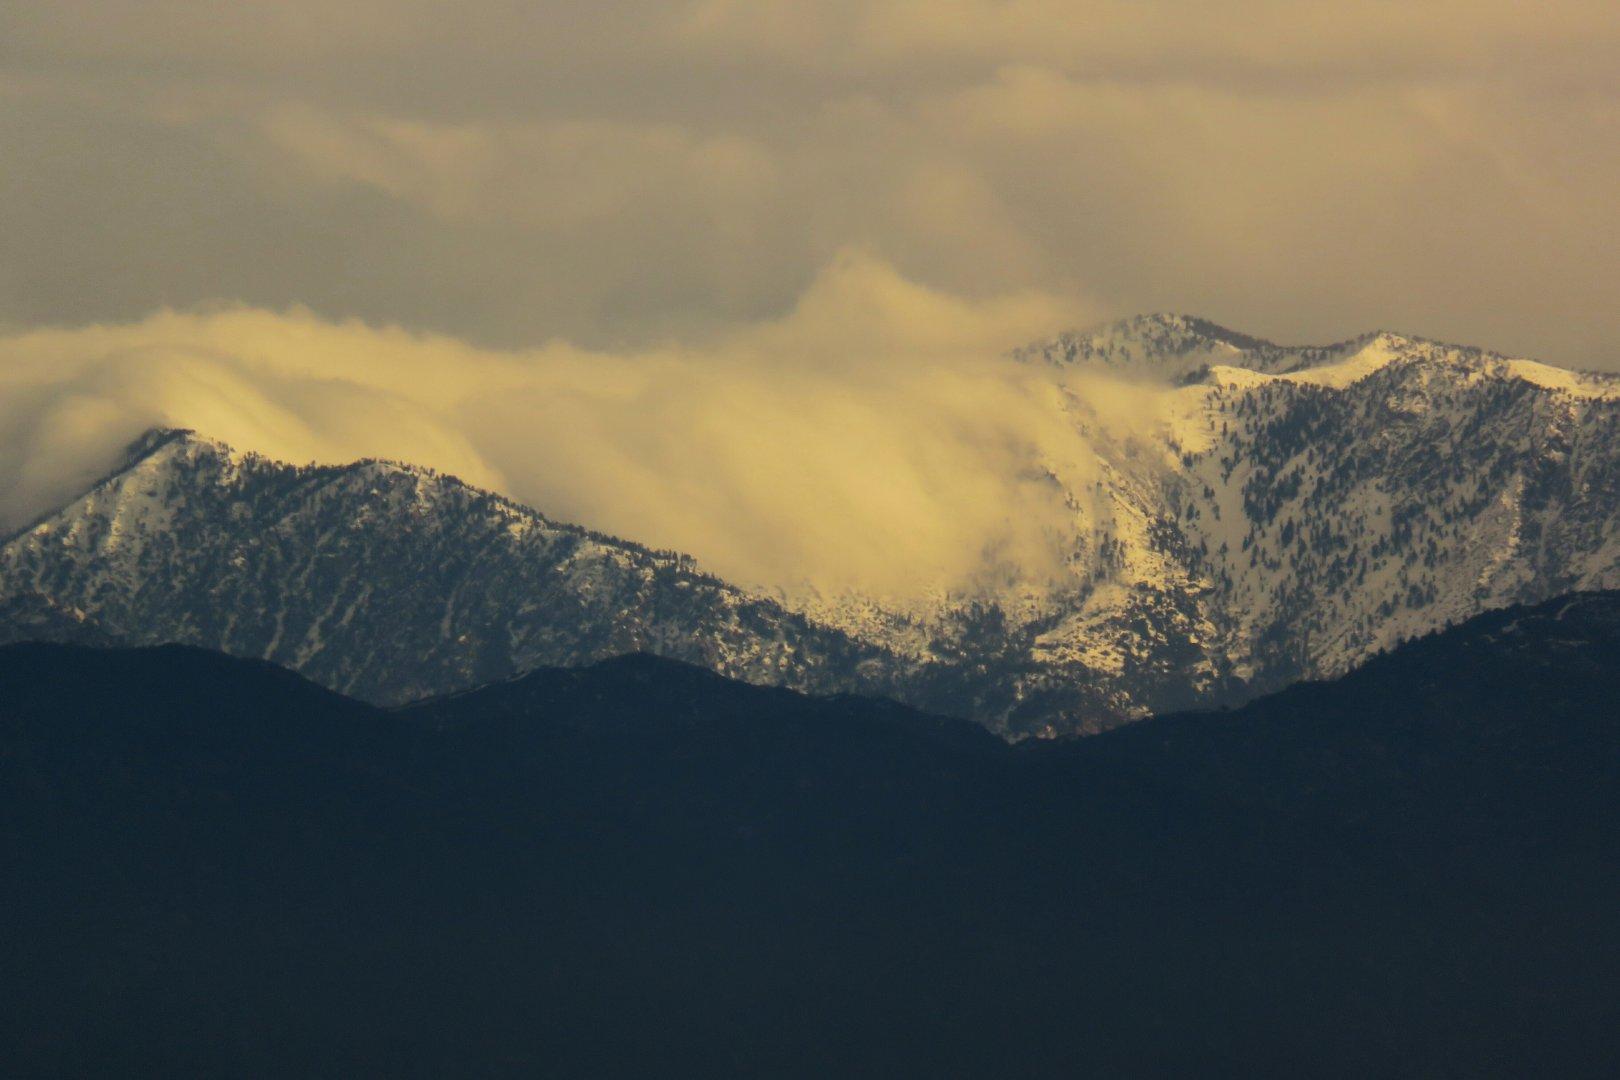 Clouds flow over the snow-covered #SanGabrielMountains above #LosAngeles this morning. We've had a decent amount of rain this December, and snow in the mountains, leading to hopes for a wet winter and enough water to store for next summer. Oh, and skiing for those who are into that sort of thing 😁